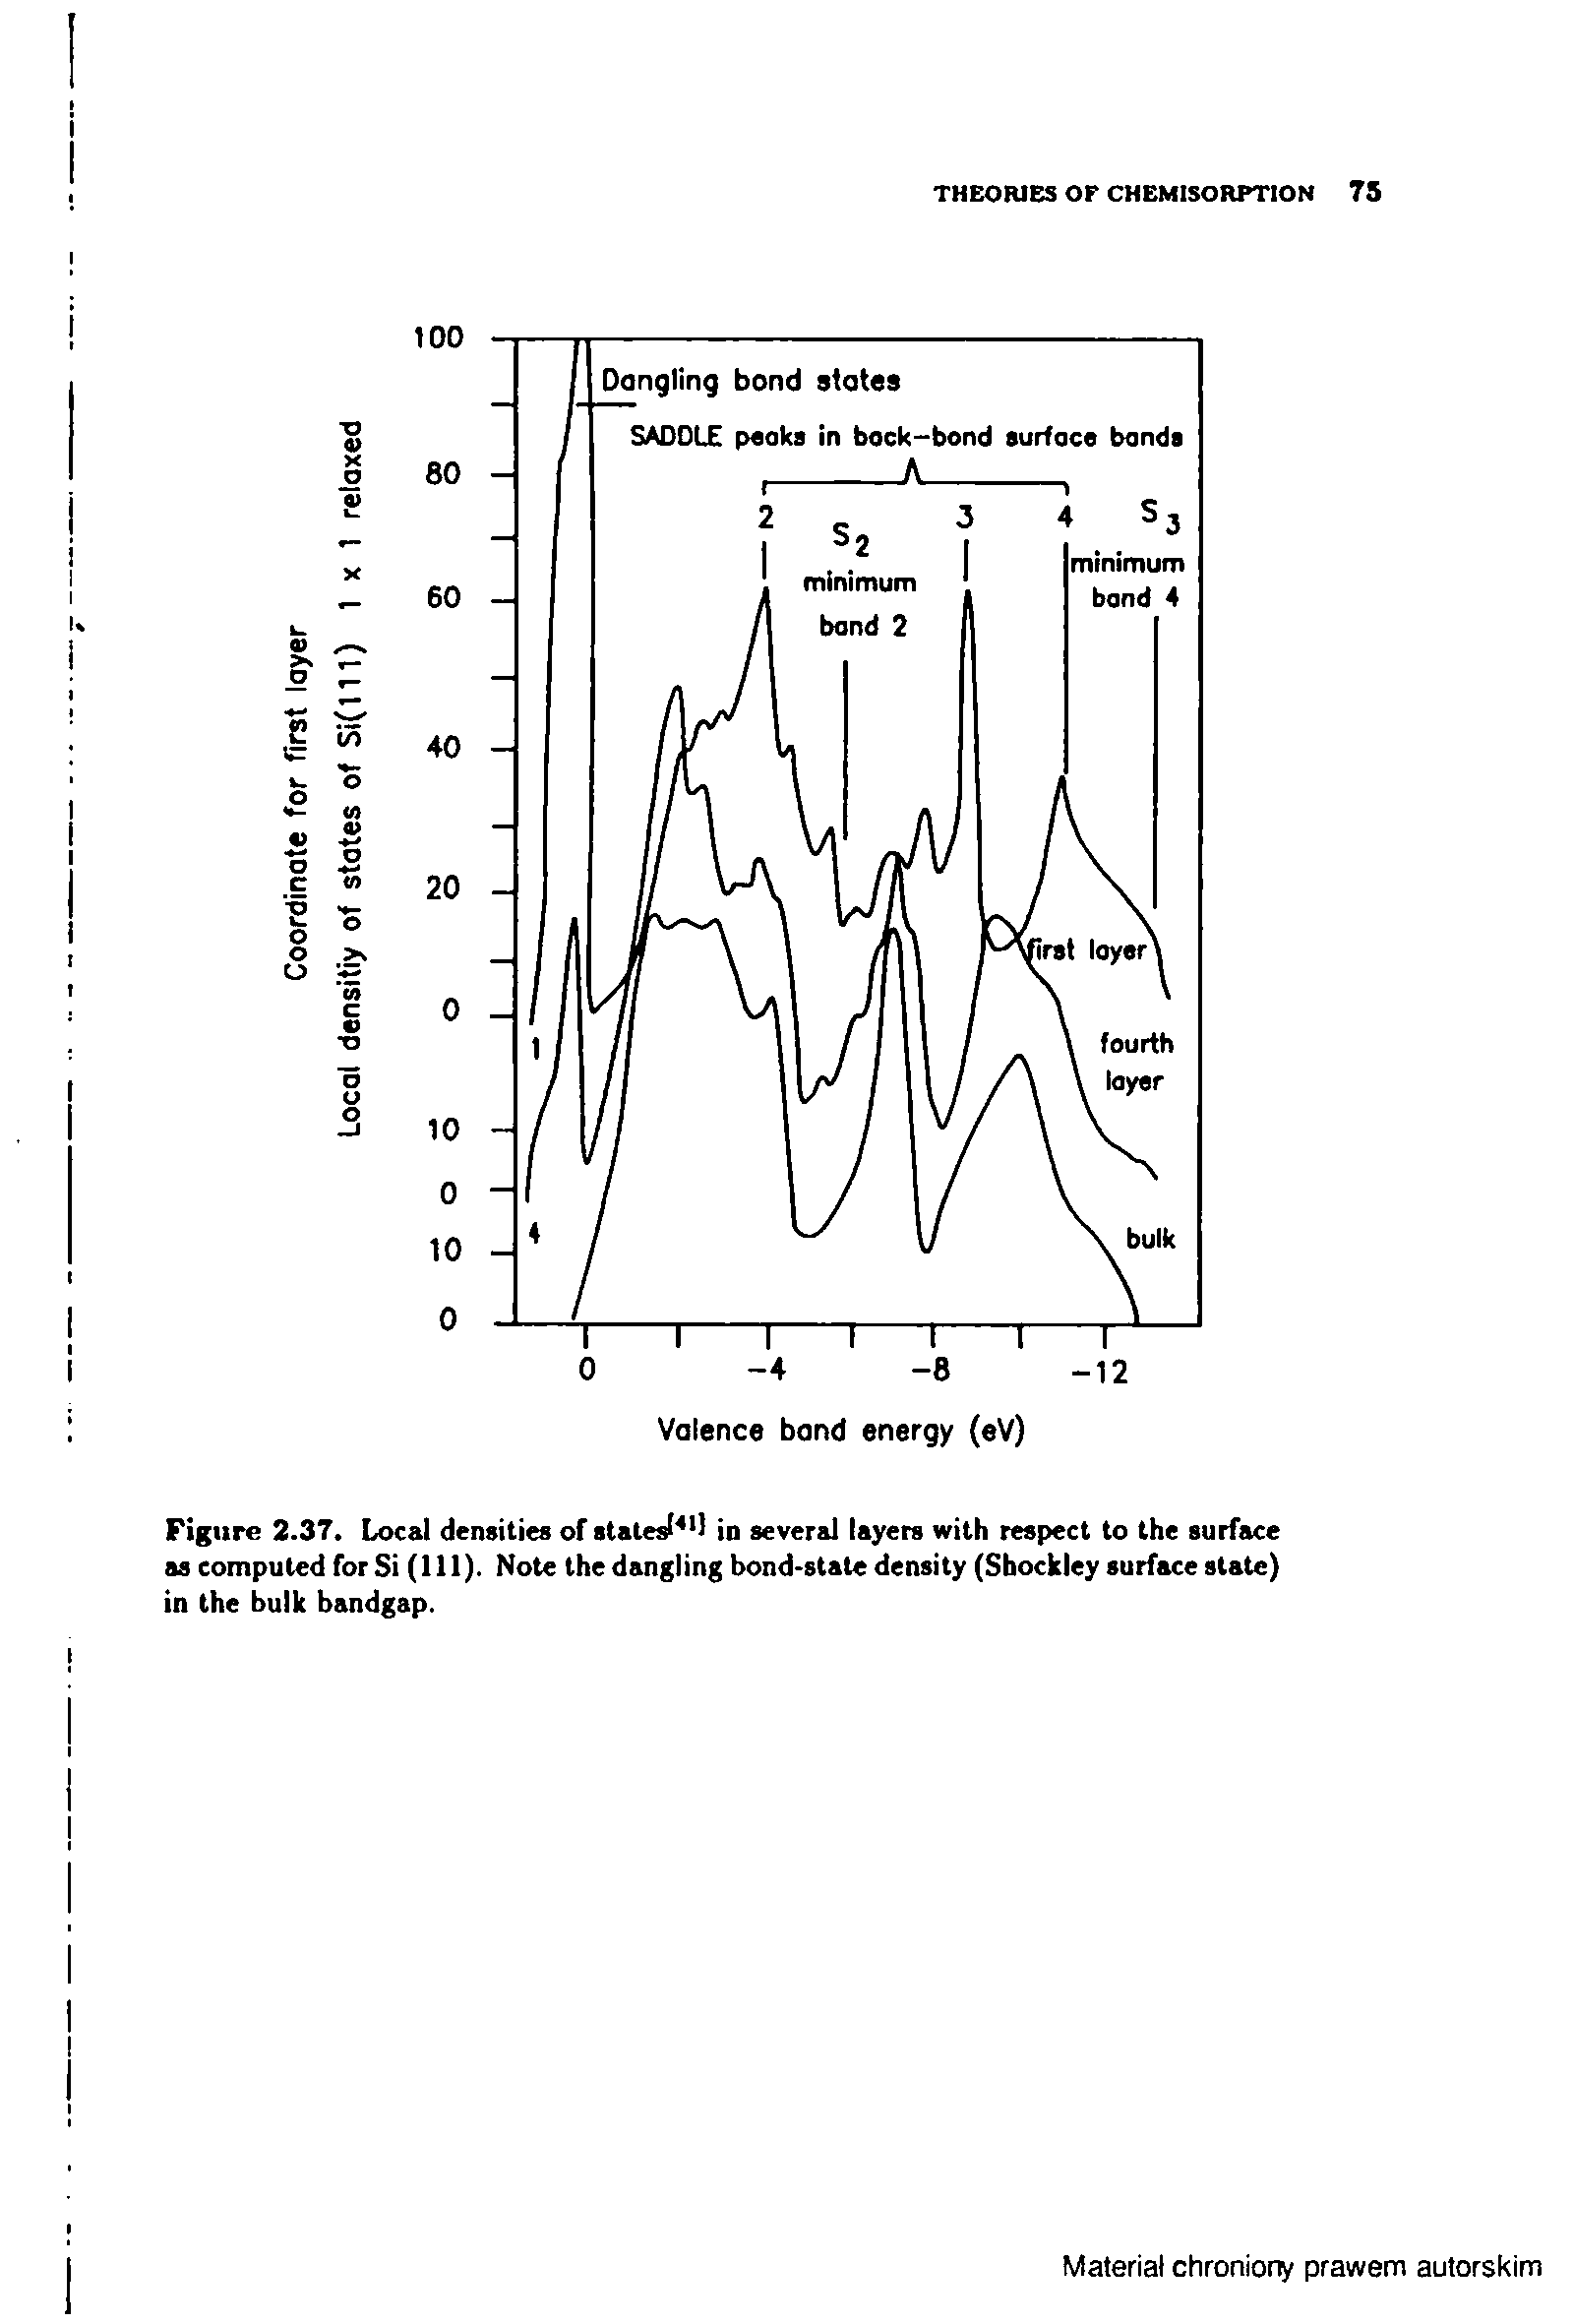 Figure 2.37. Local densities of stalesl in several layers with respect to the surface as computed for Si (111). Note the dangling bond-state density (Shockley surface state) in the bulk bandgap.